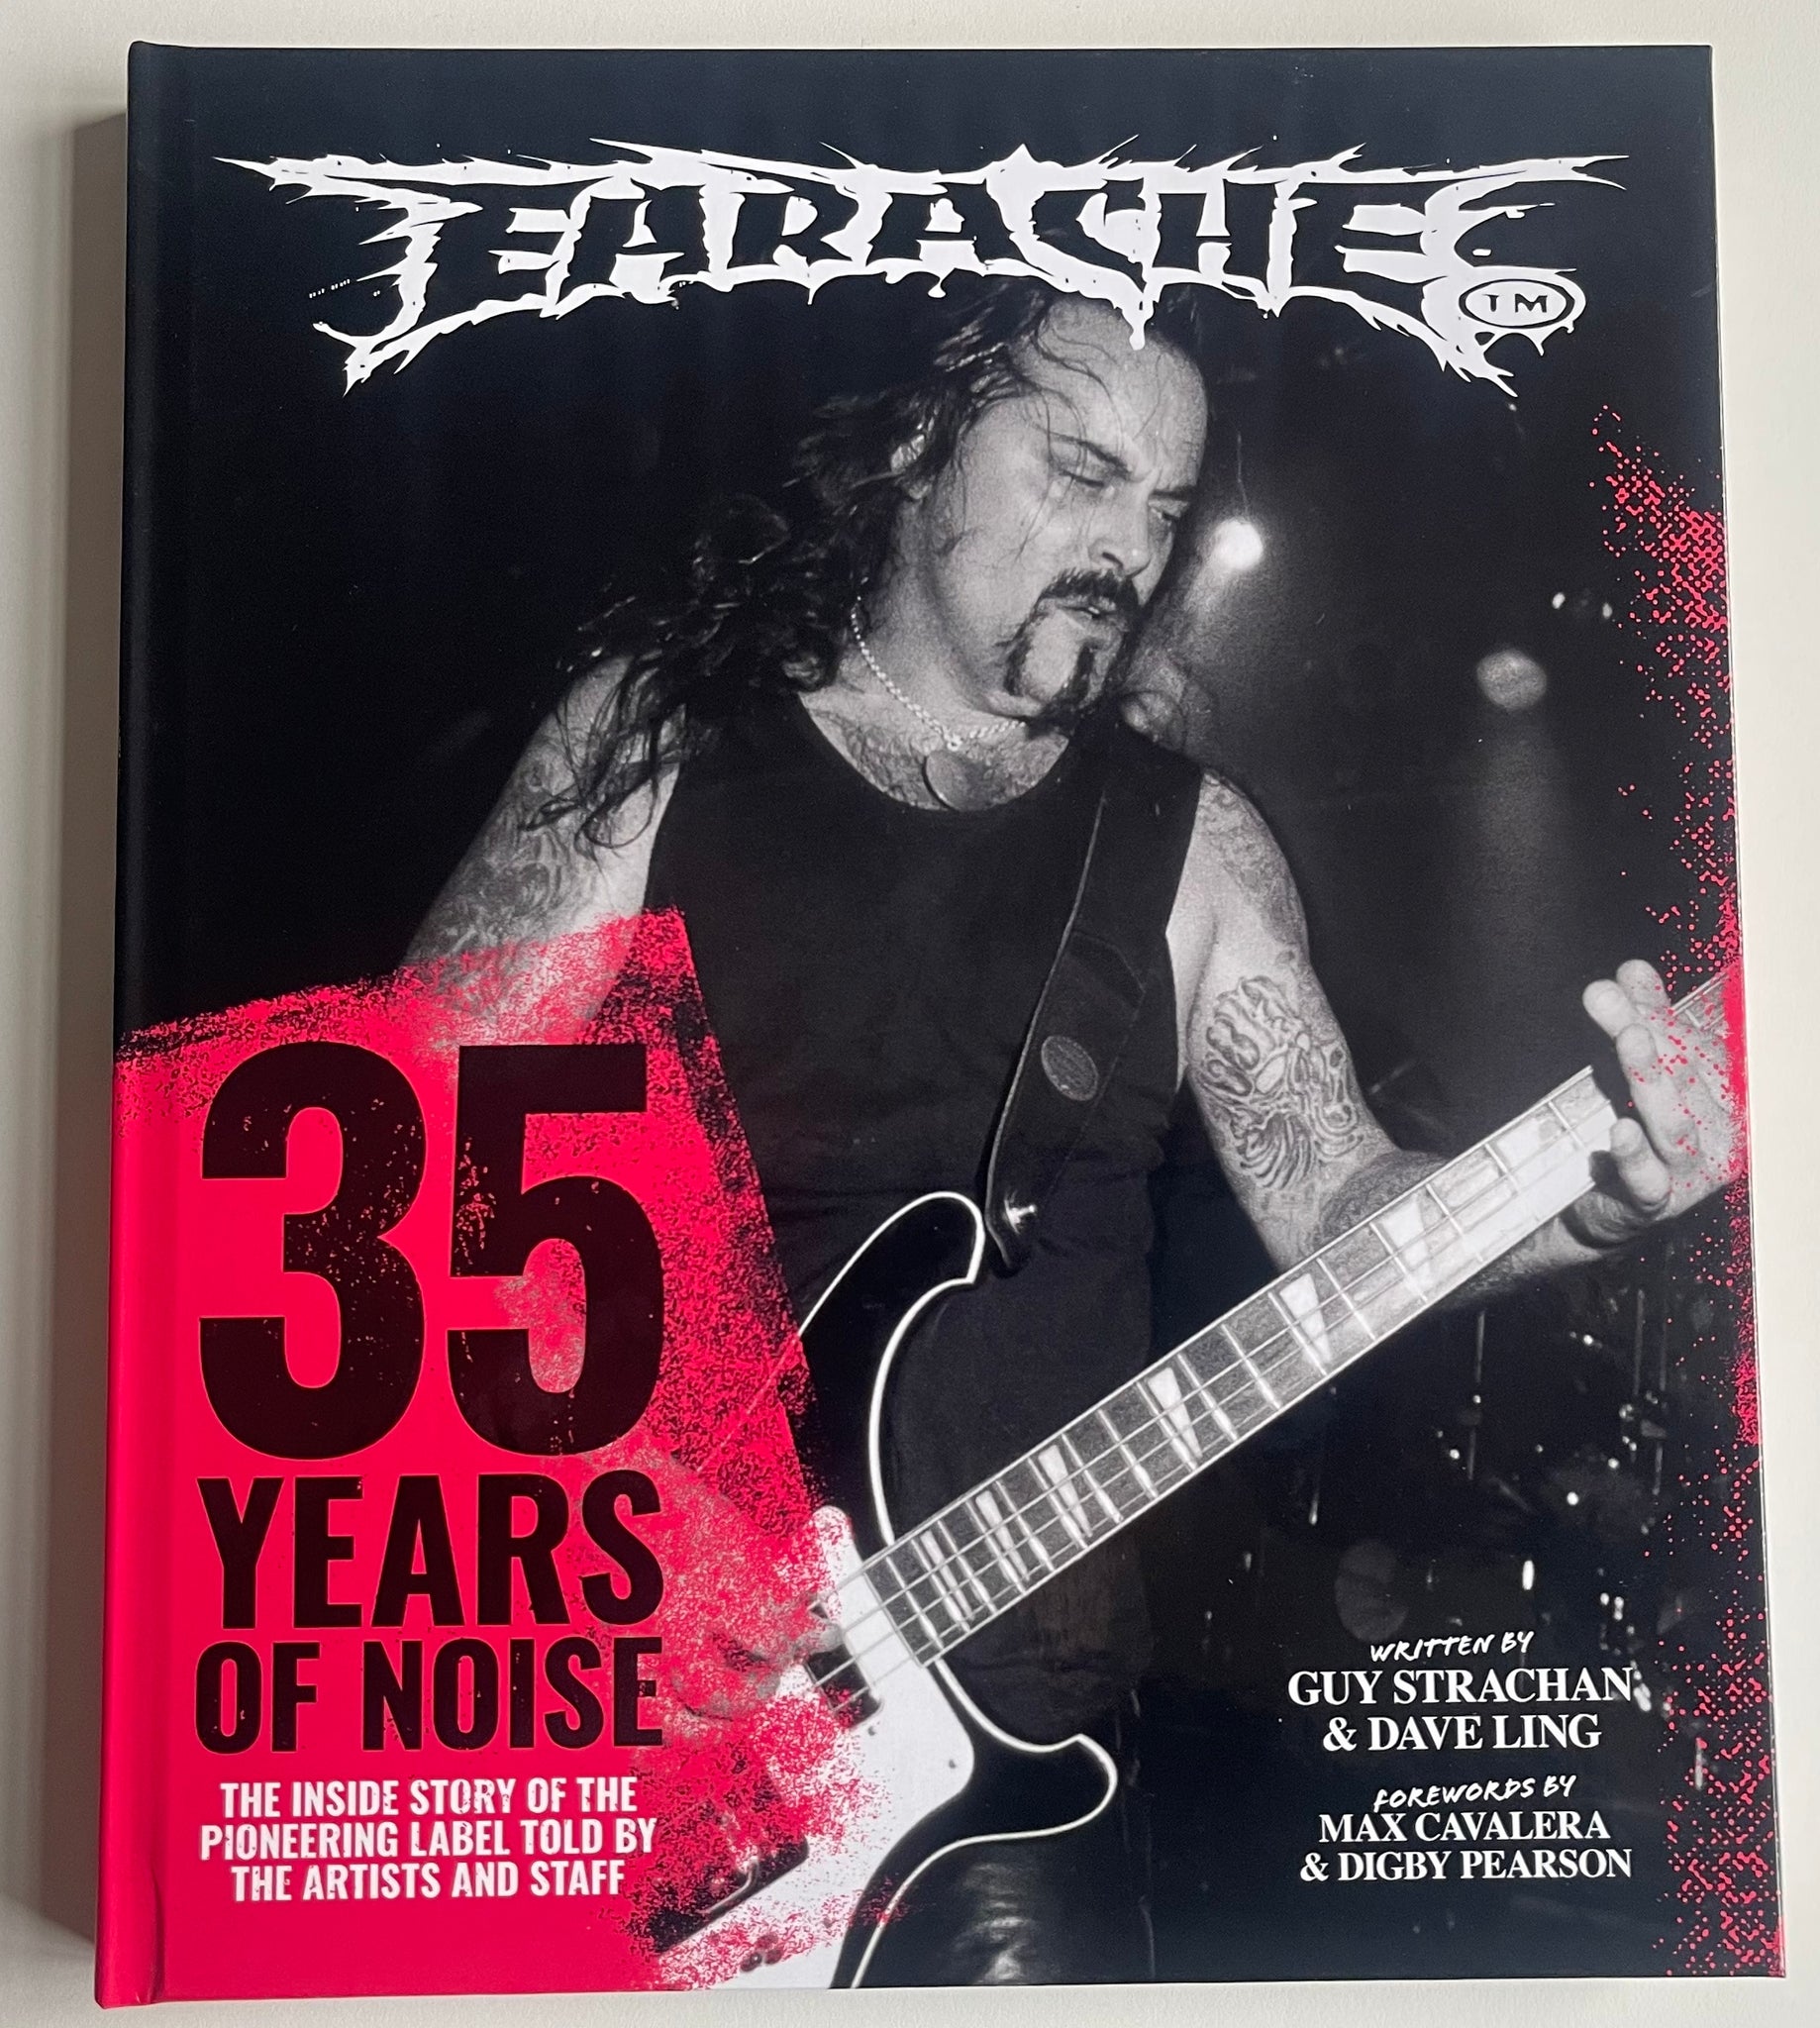 Earache "35 Years Of Noise" 152 Page Hardcover Book